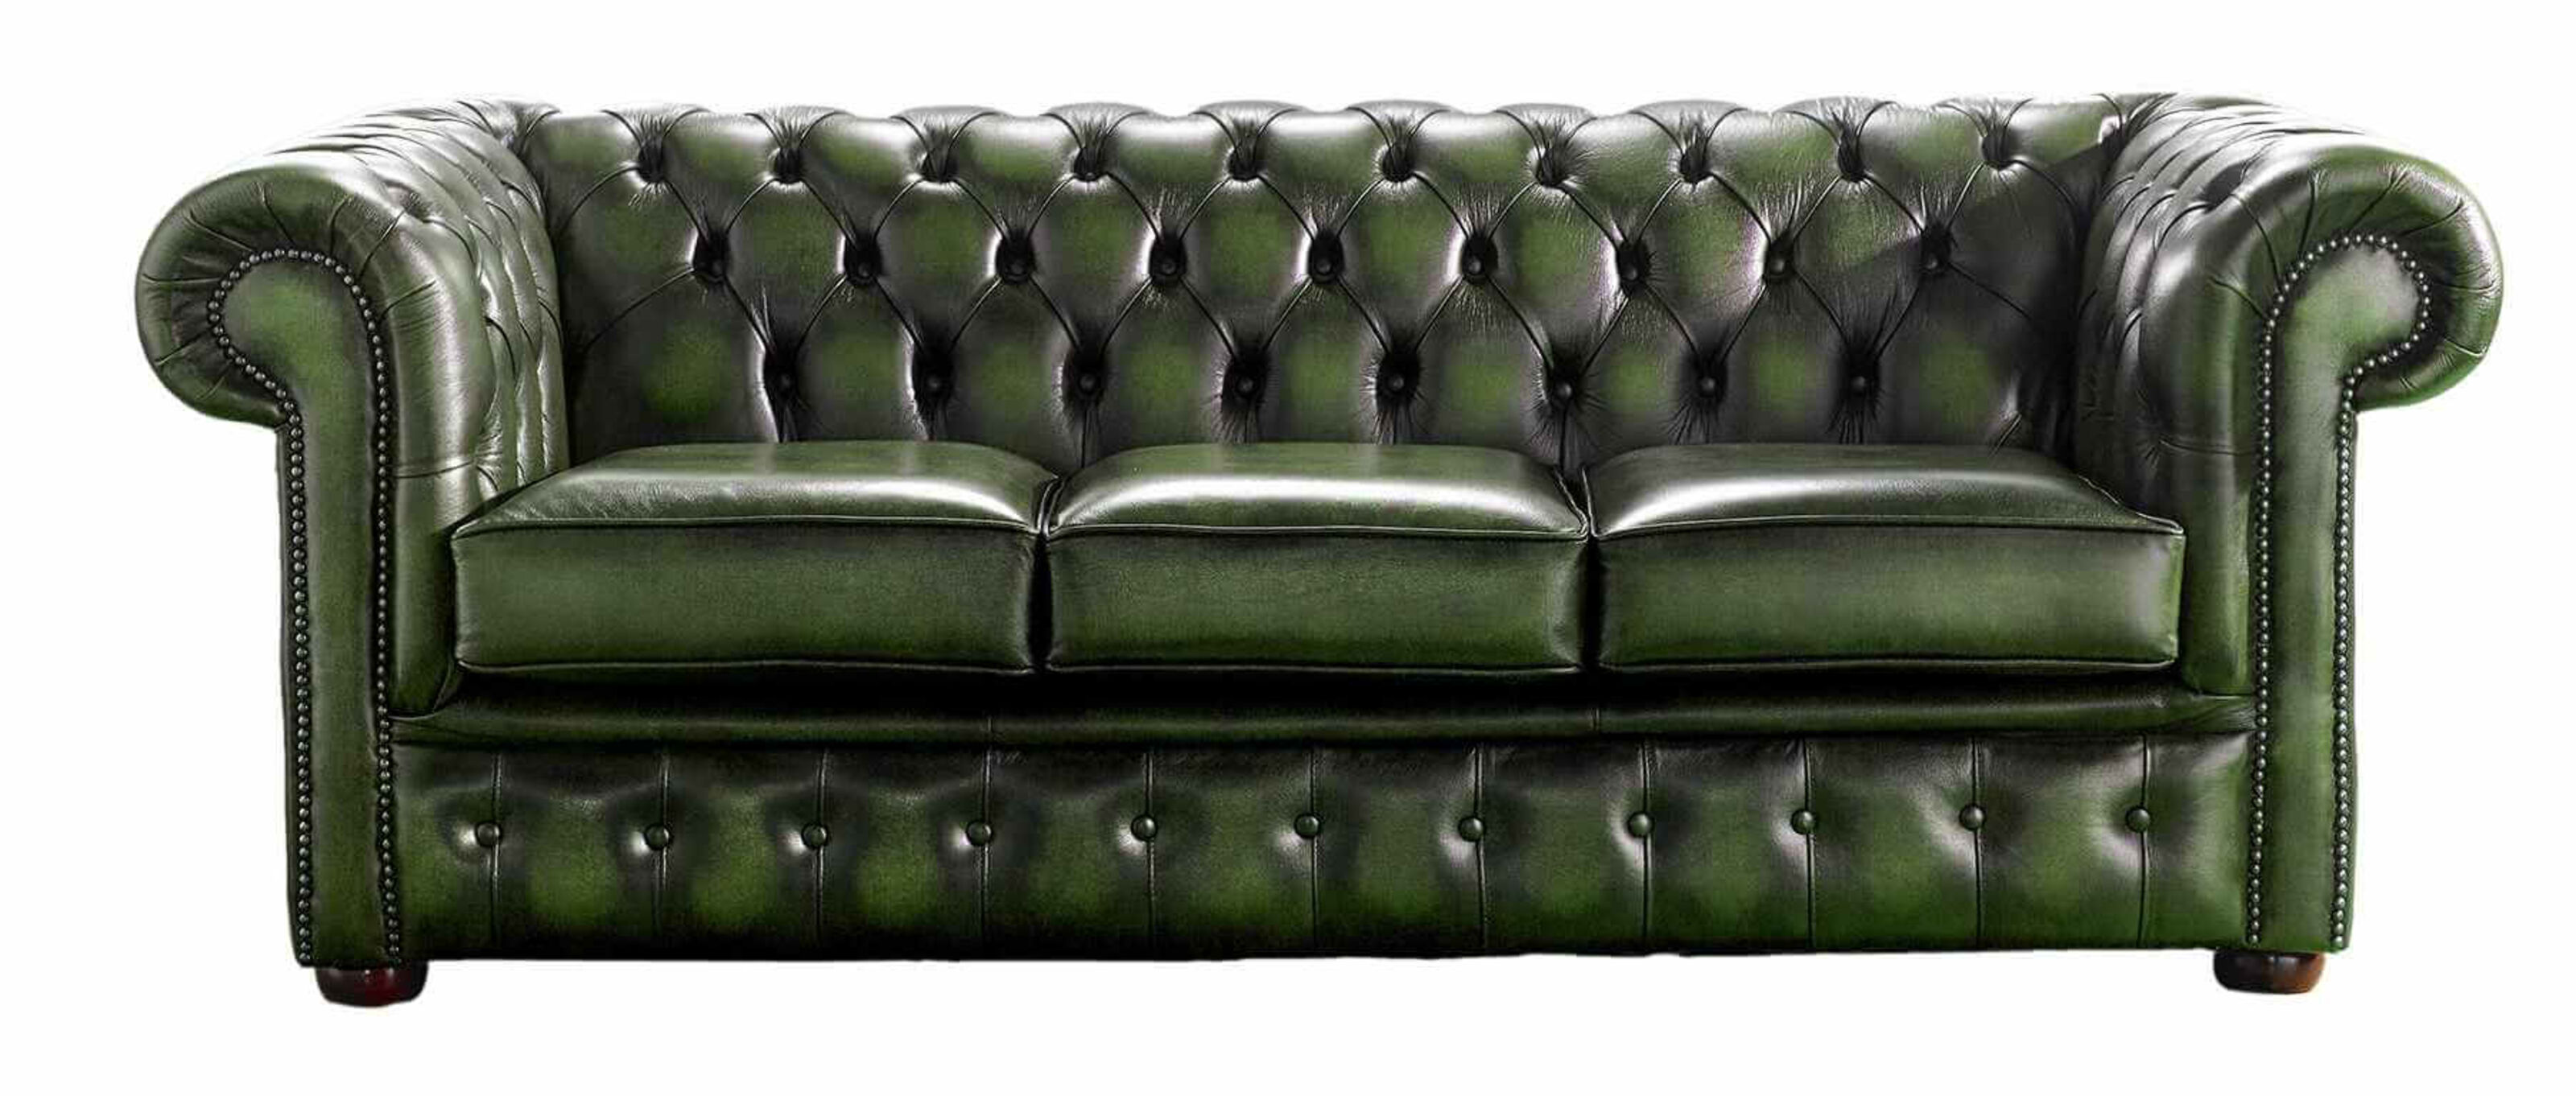 Timeless Elegance Discover Chesterfield Sofas in Chester Le Street  %Post Title